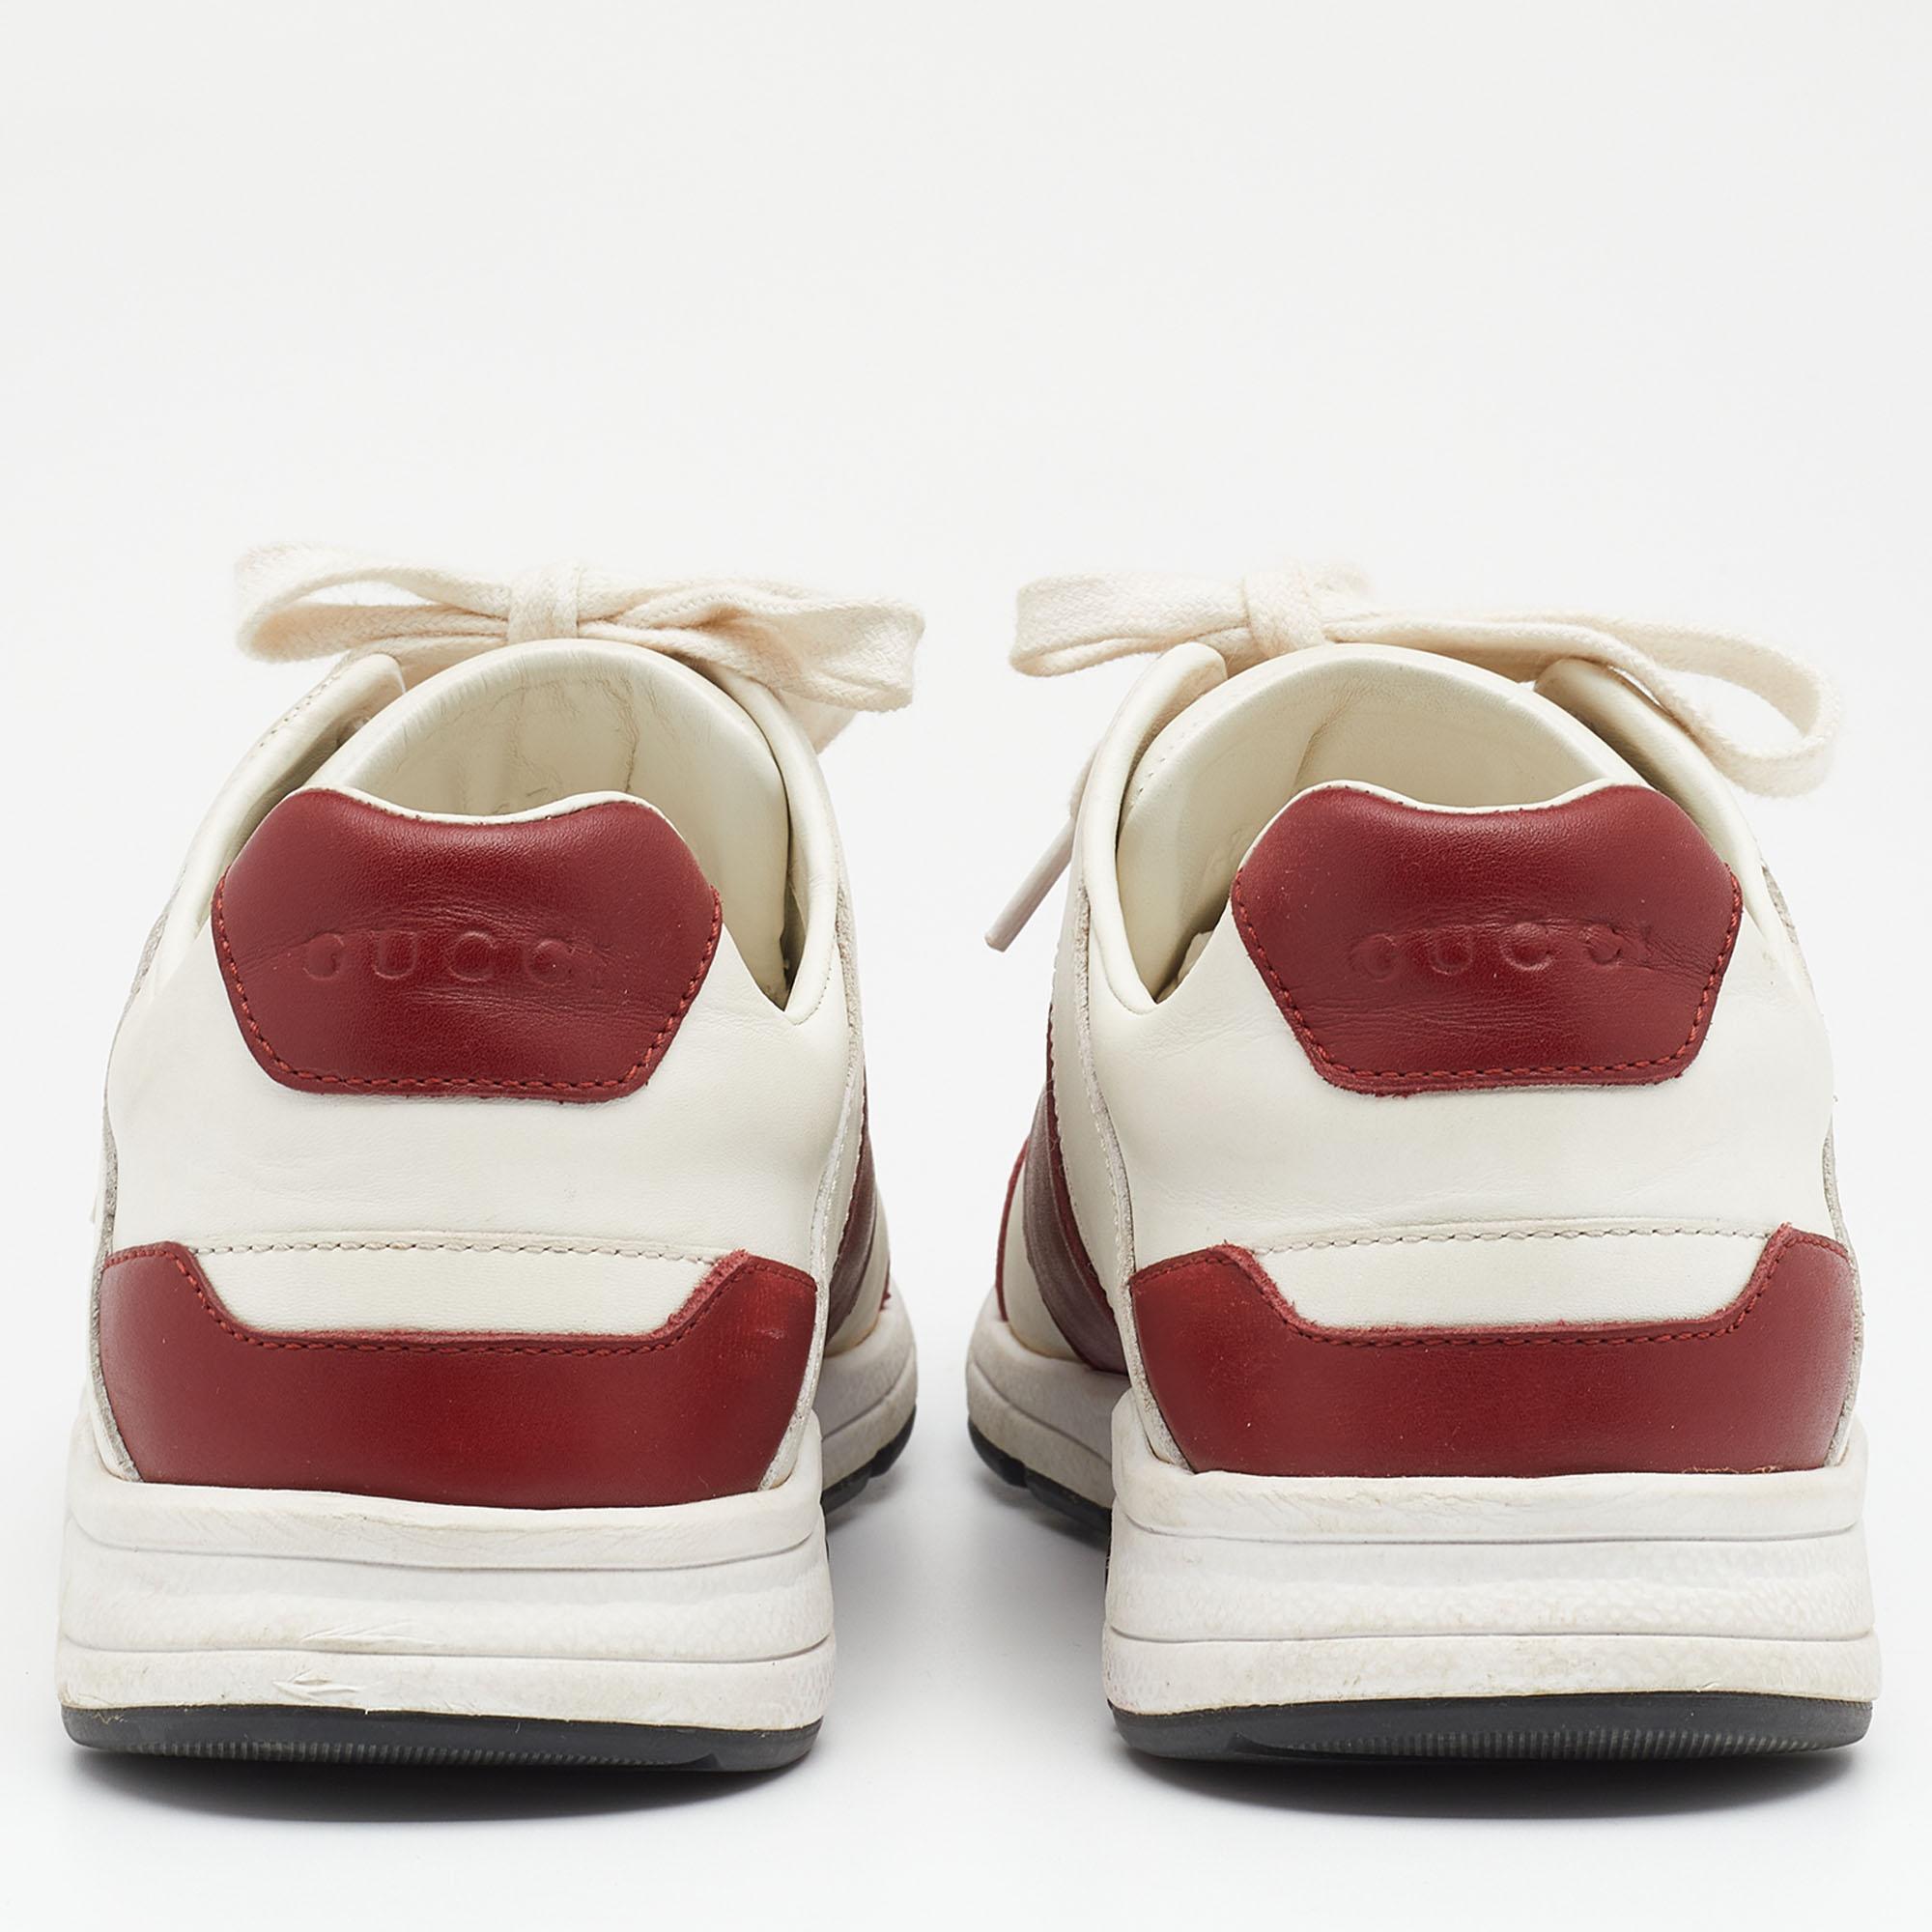 Gucci Red/White Leather Interlocking G Low Top Sneakers Size 37.5